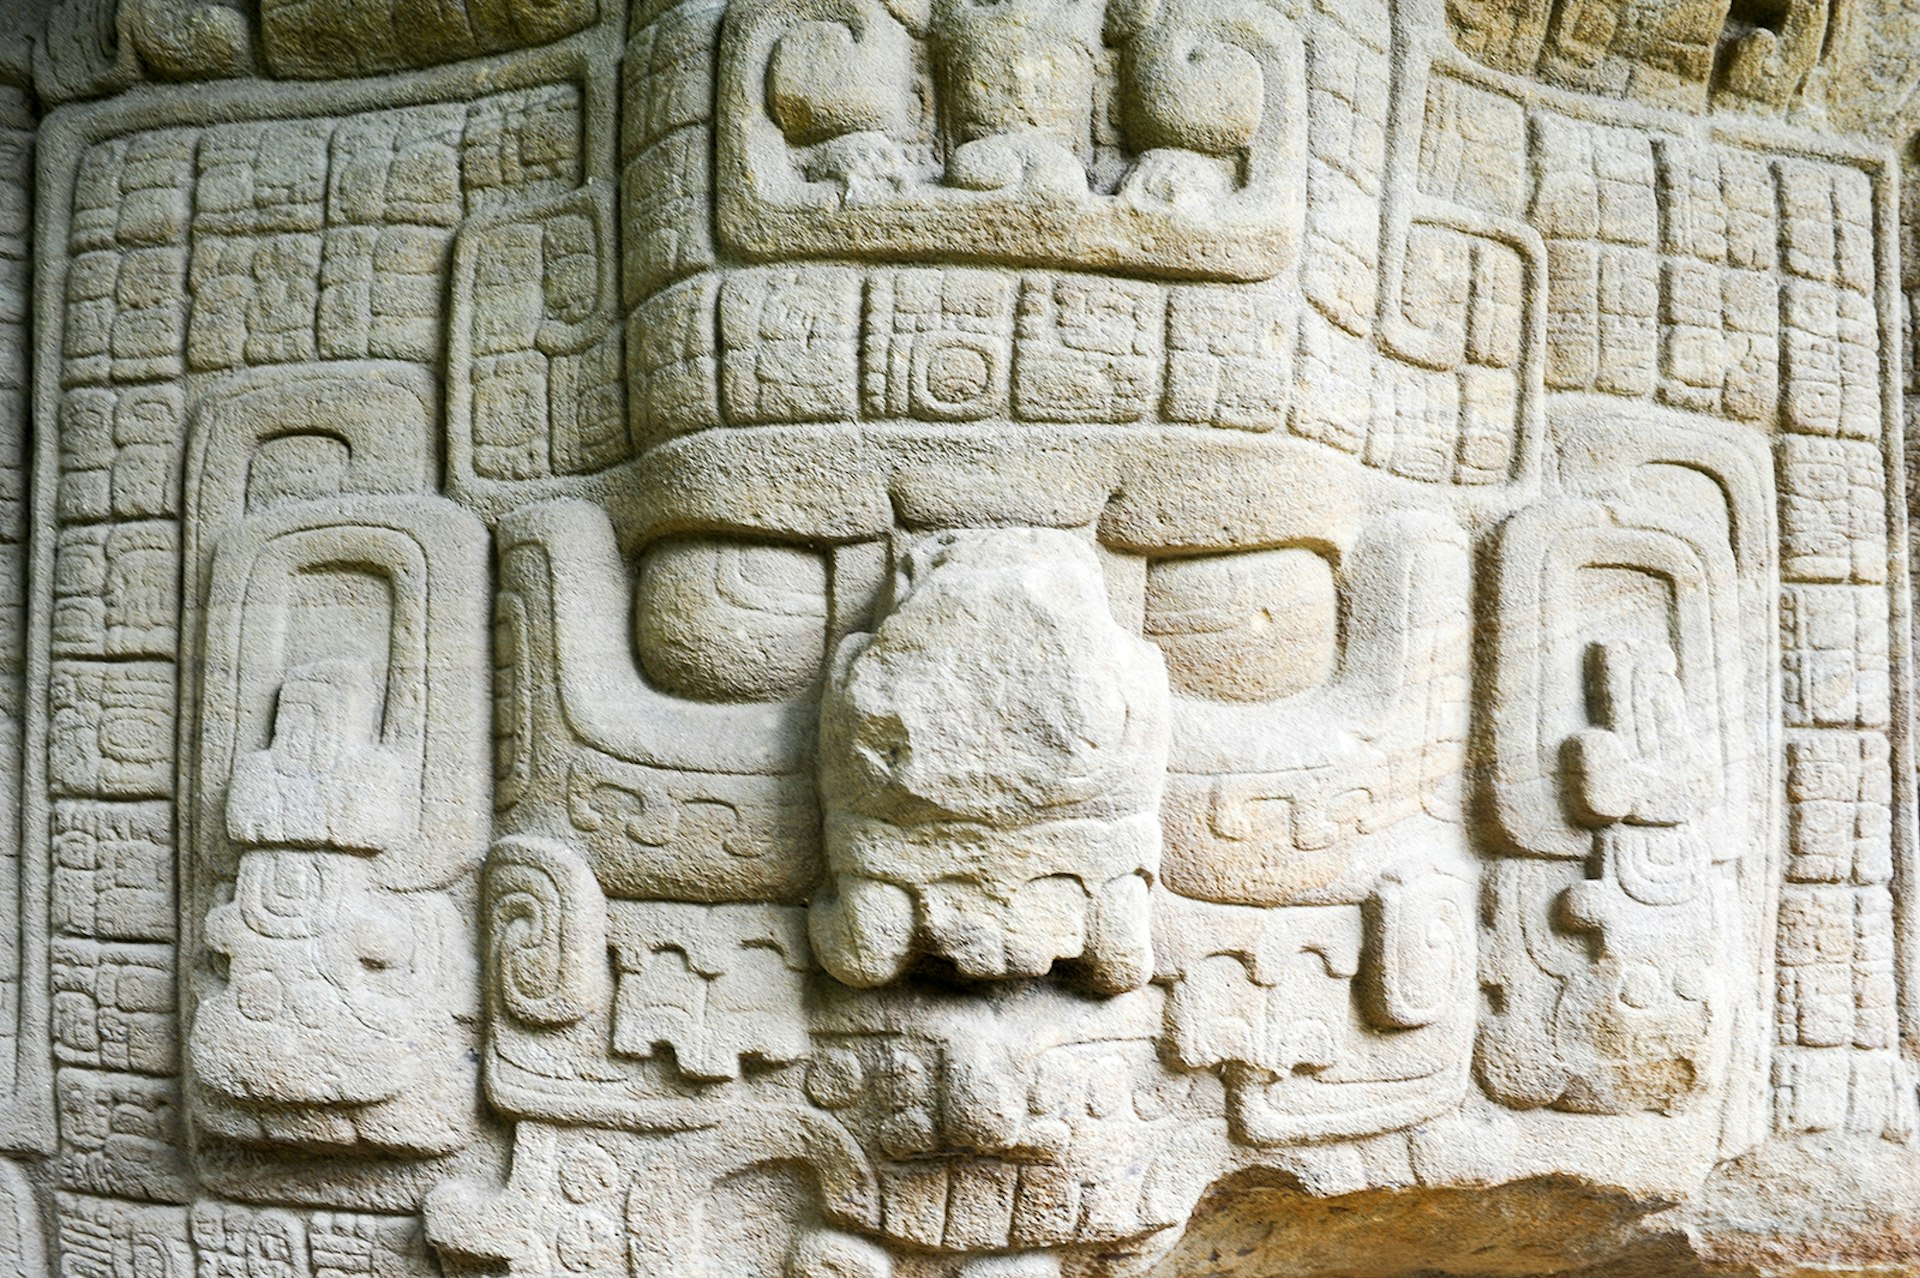 Features - Mayan archaeological Site of Quirigua